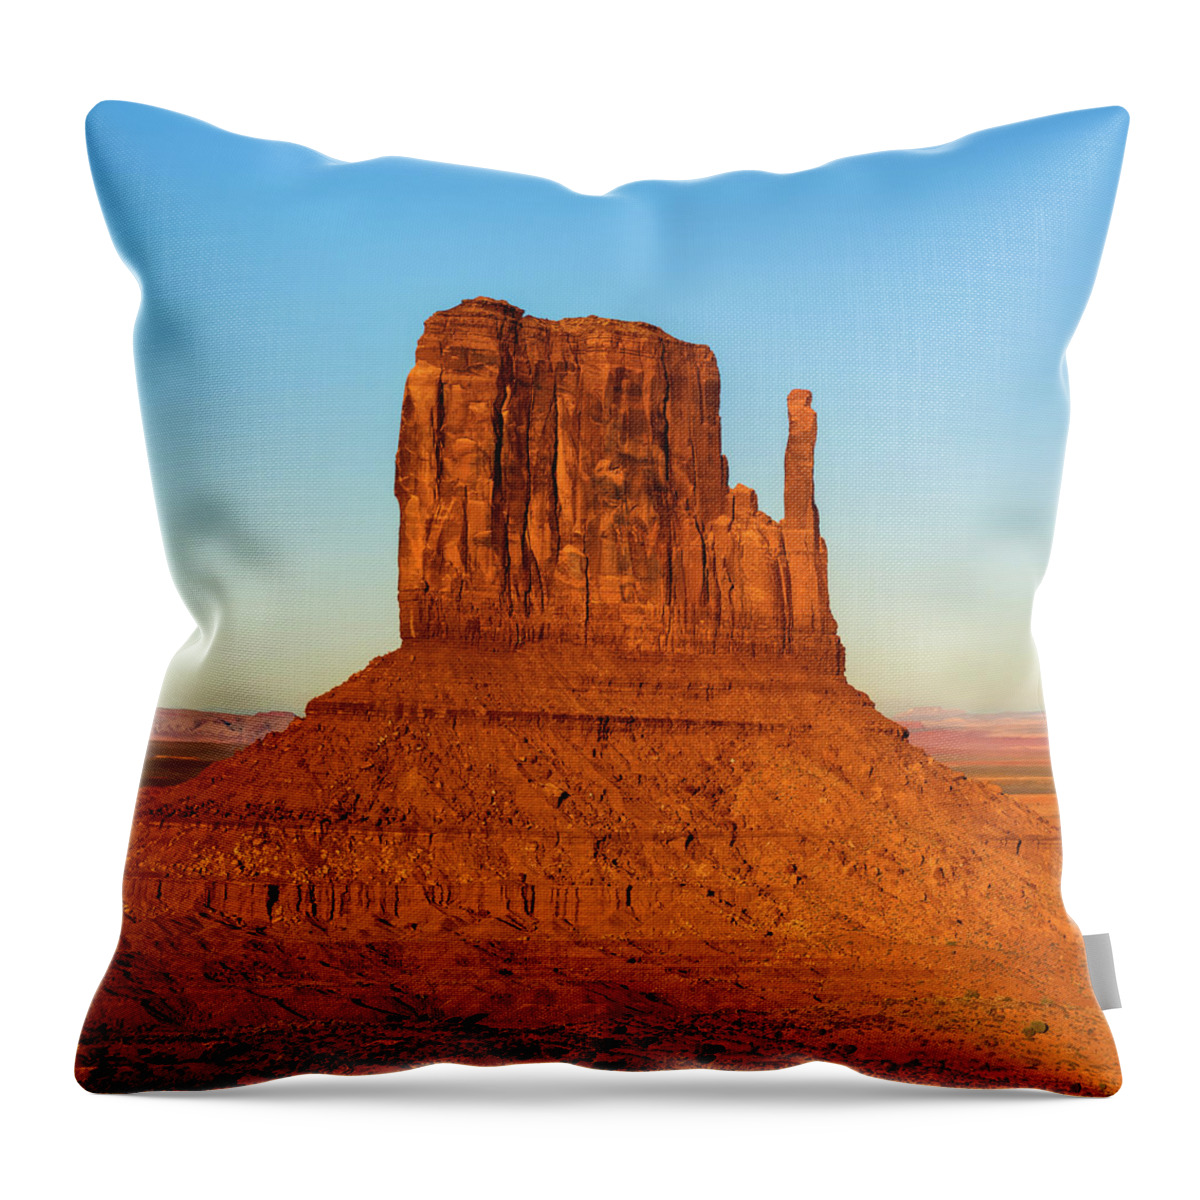 America Throw Pillow featuring the photograph Left Panel 1 of 3 - Monument Valley Buttes Panoramic Landscape at Sunset by Gregory Ballos